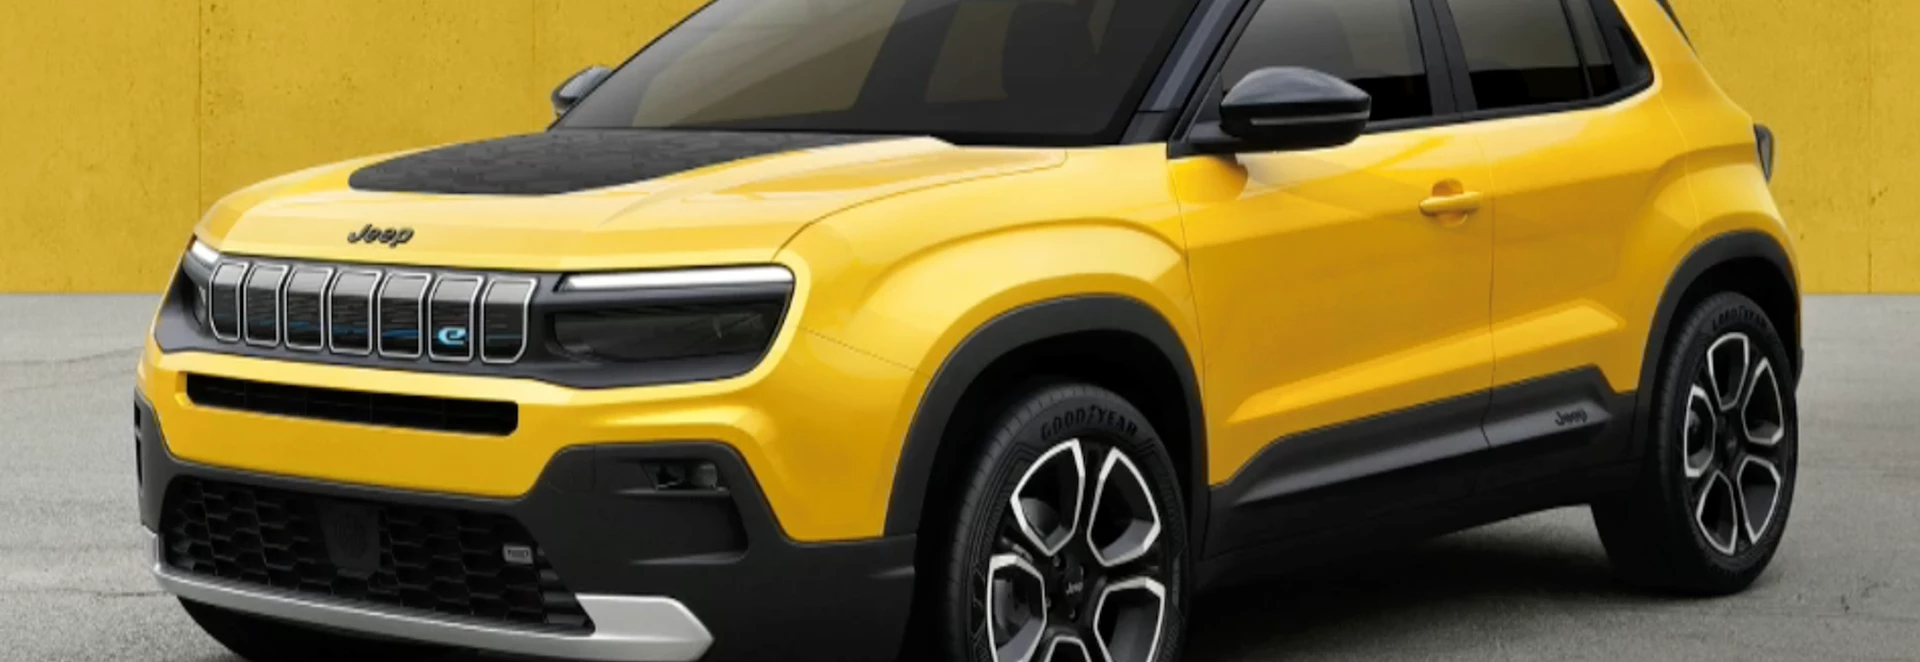 Jeep previews first fully electric model 